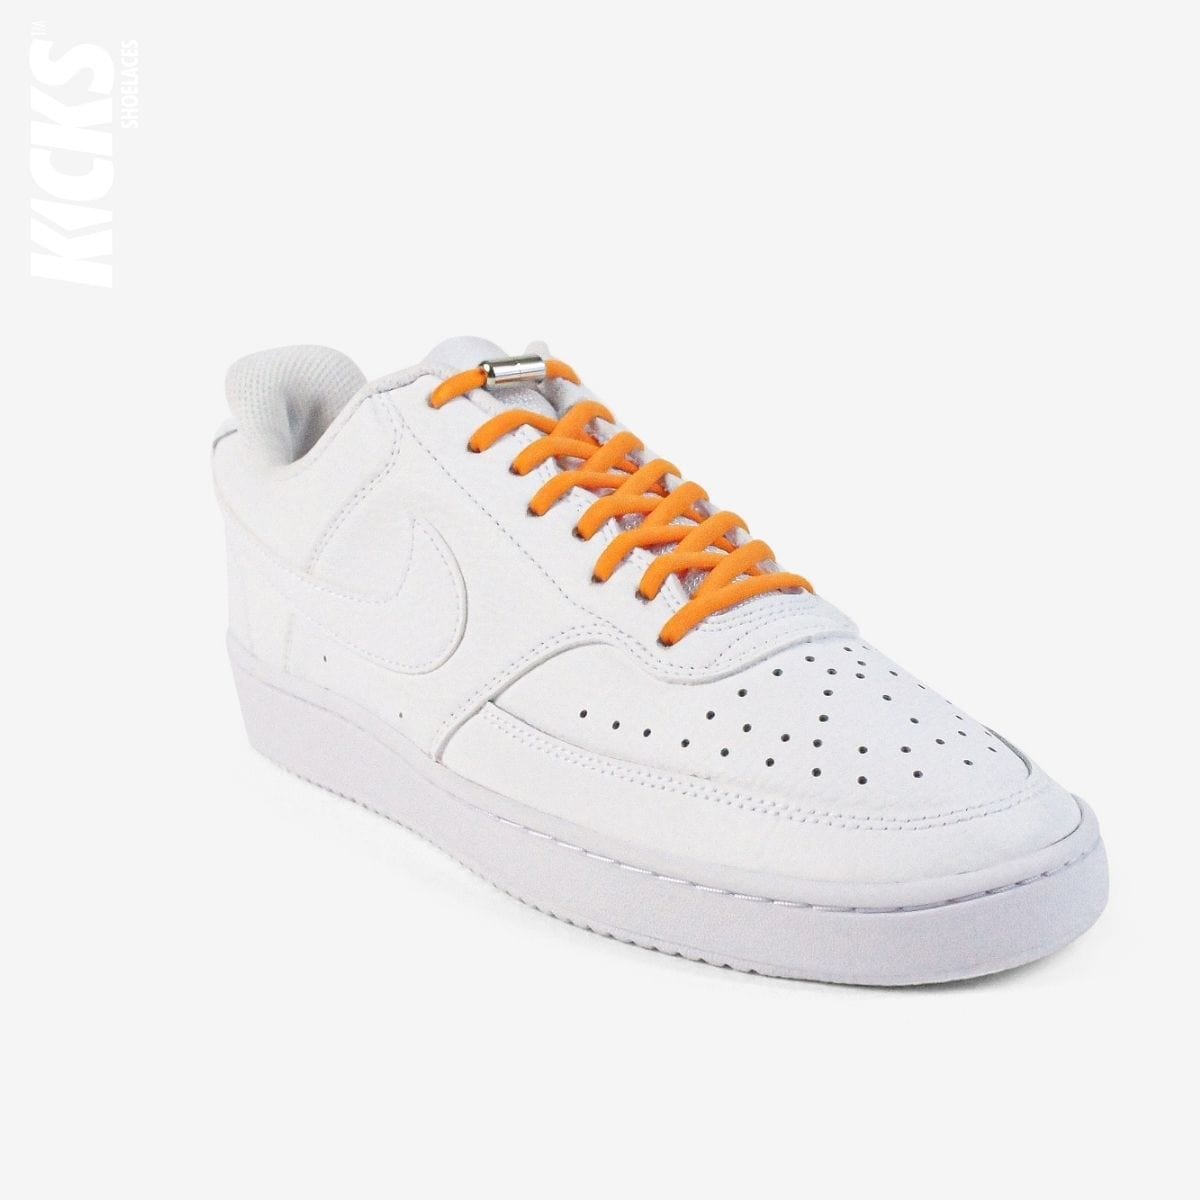 round-no-tie-shoelaces-with-orange-laces-on-nike-white-sneakers-by-kicks-shoelaces